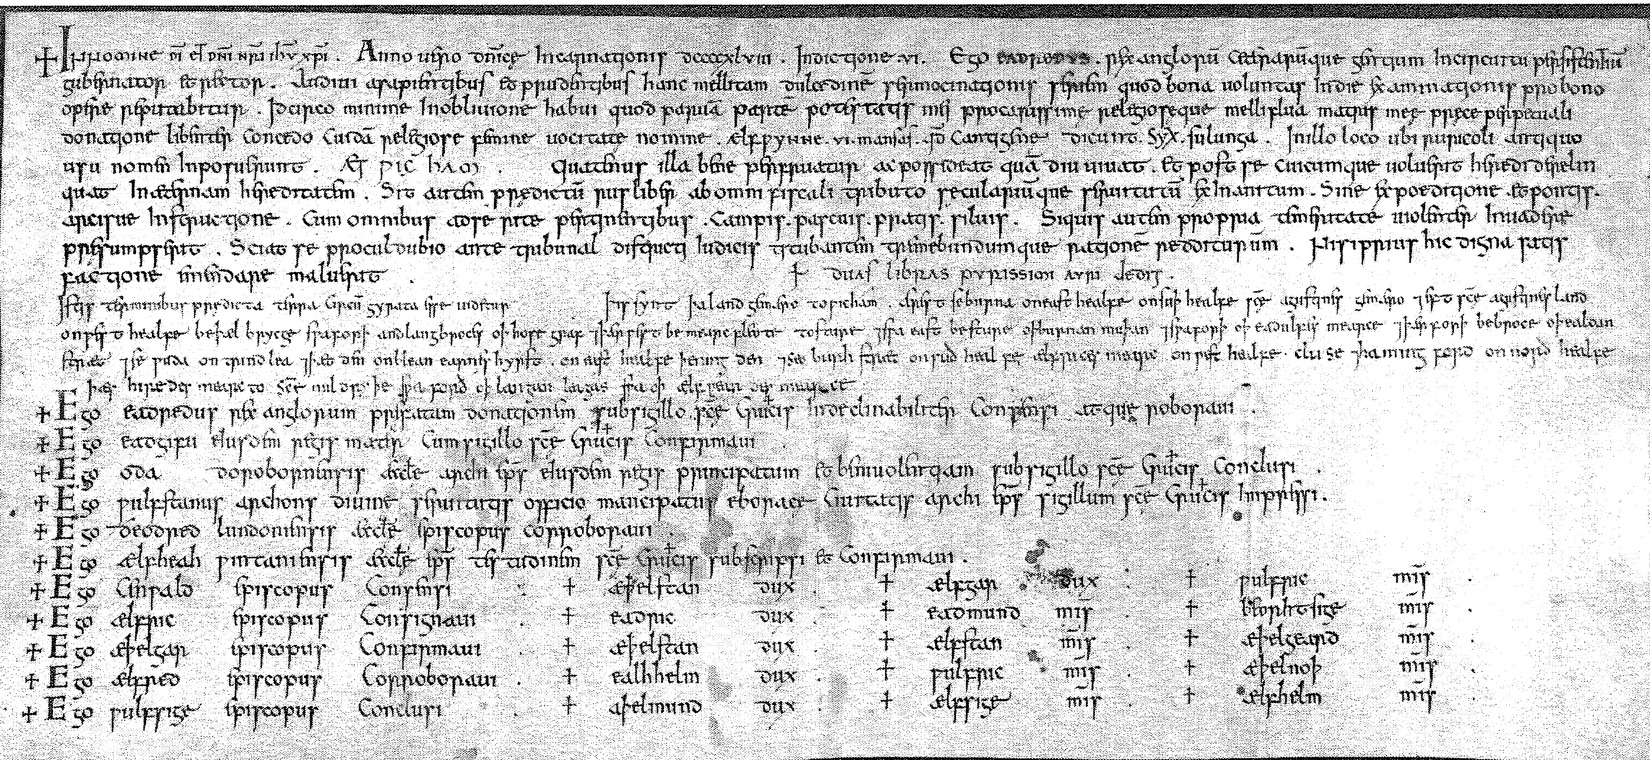 S 535 Diploma of King Eadred for Ælfwyn AD 948, written by Edmund Cf